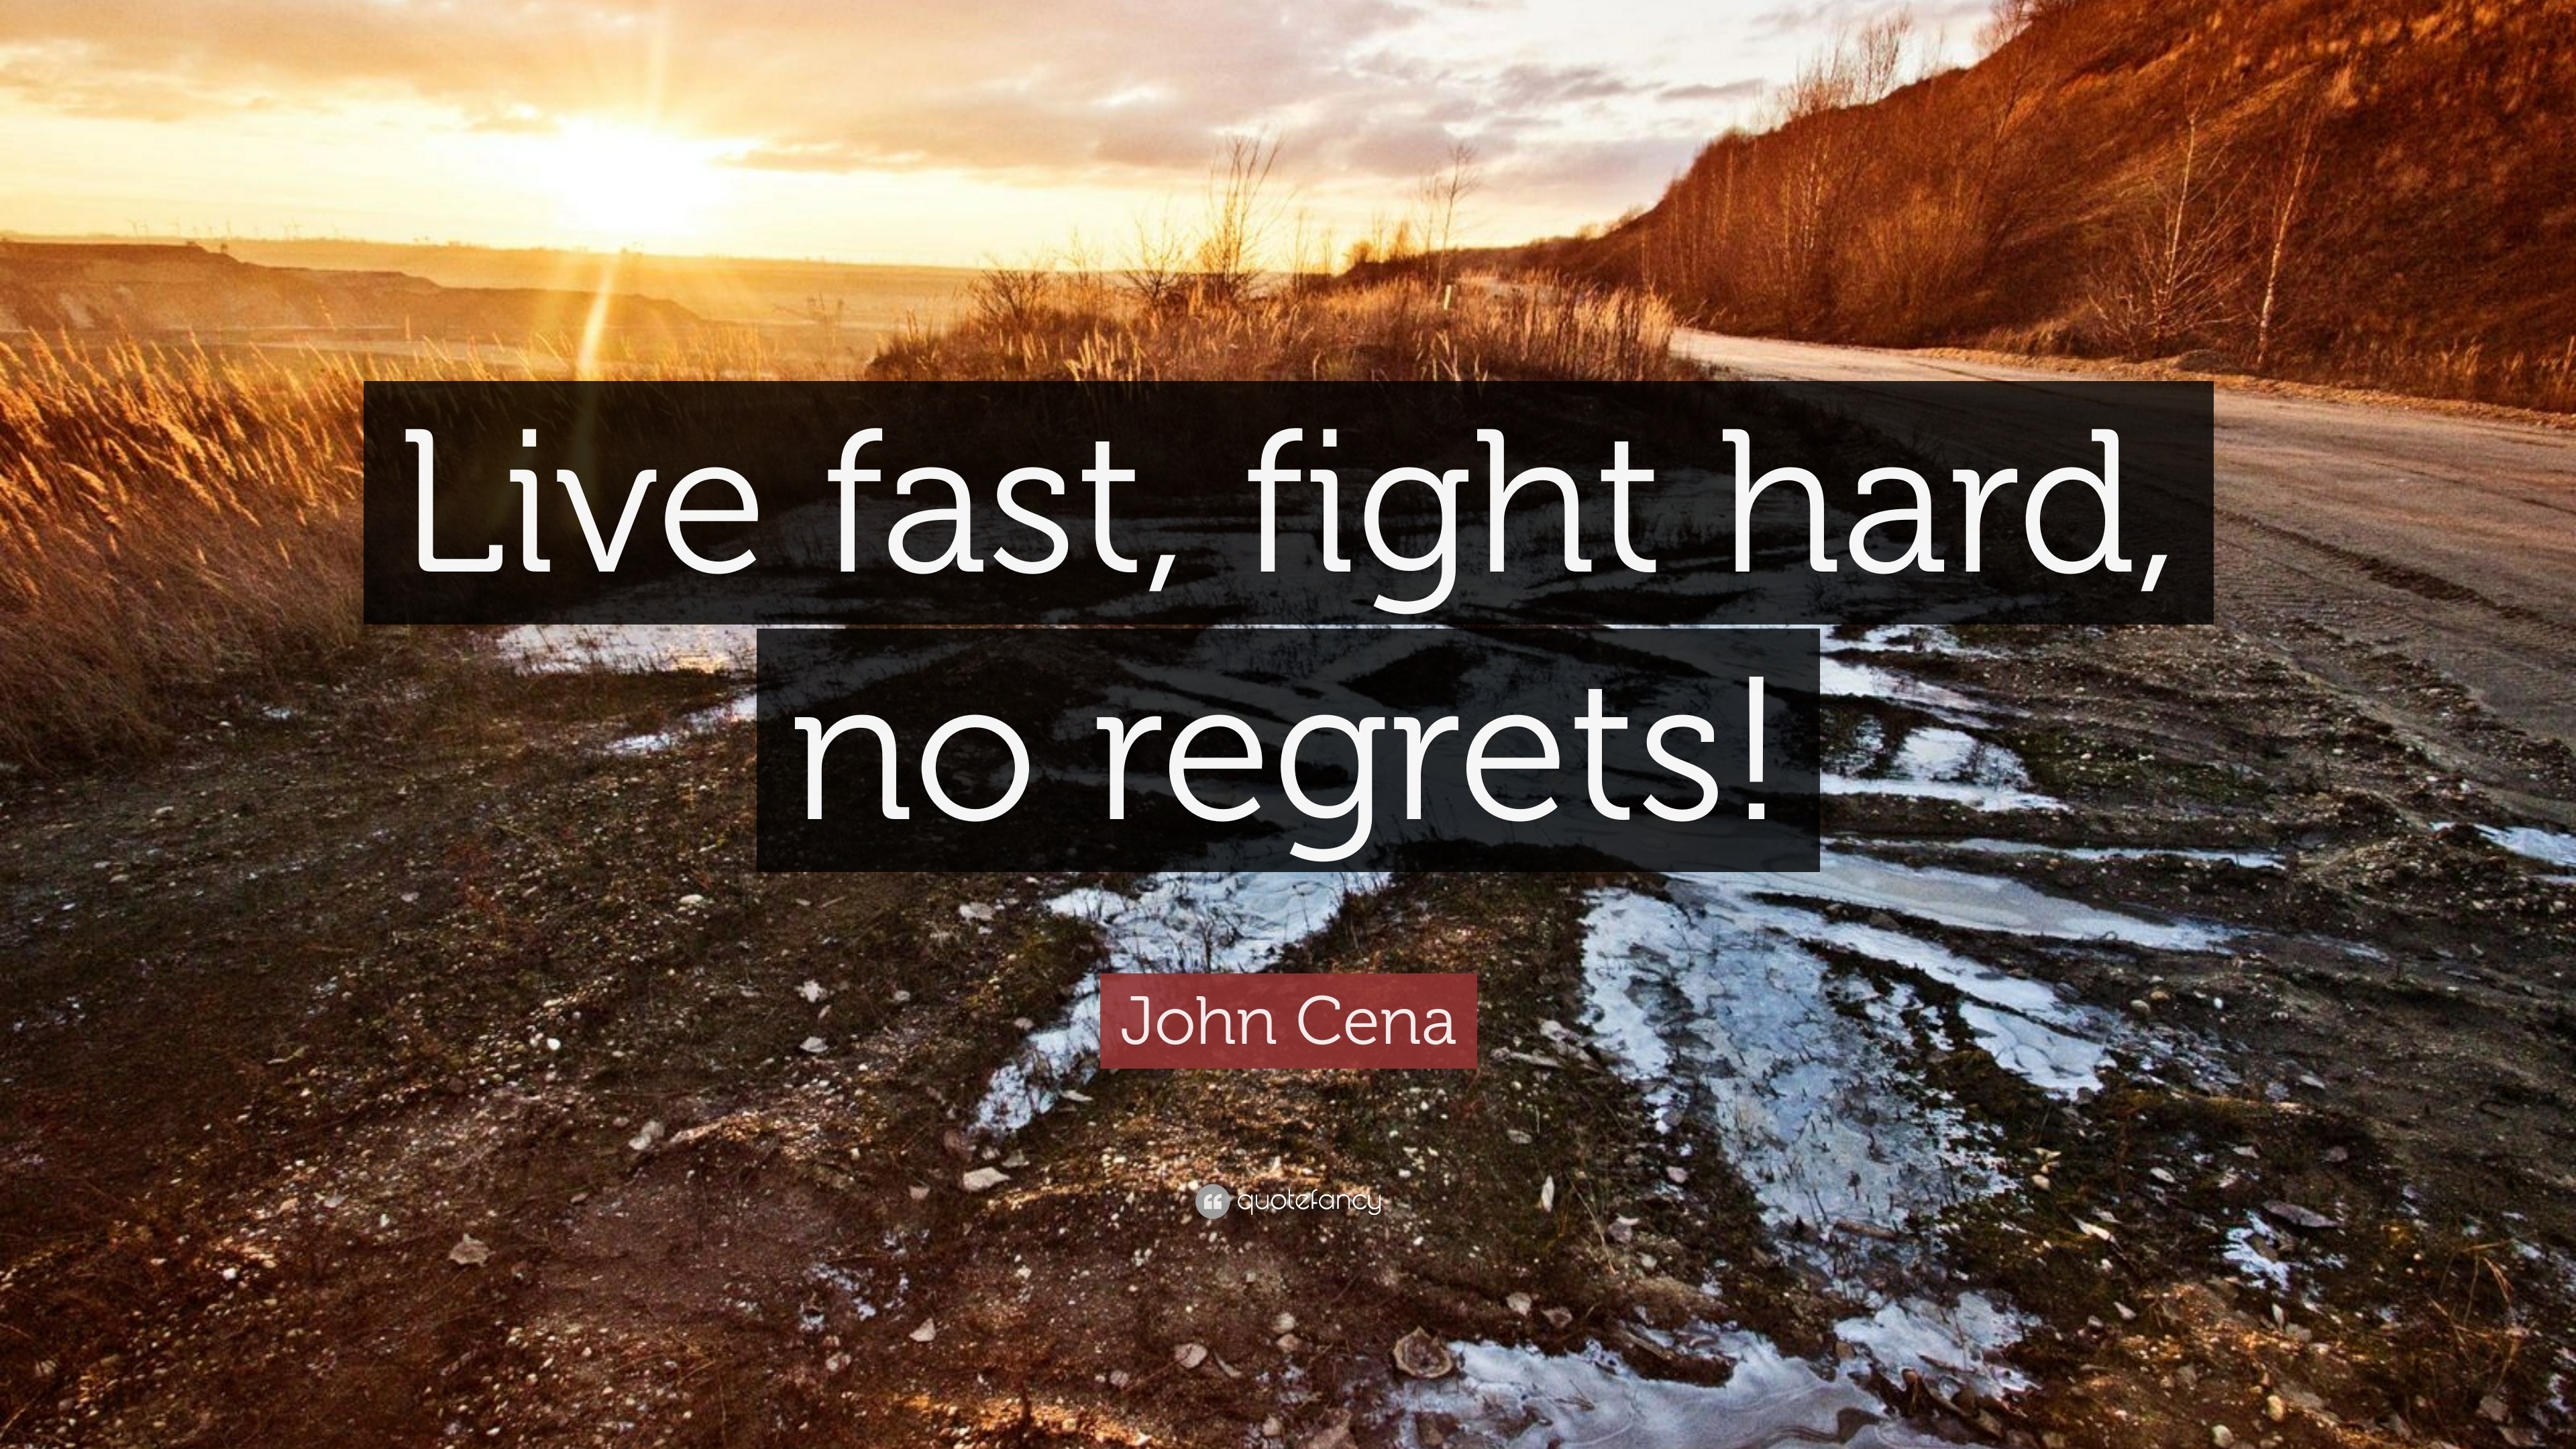 40 Regret Quotes About Living Life To The Fullest